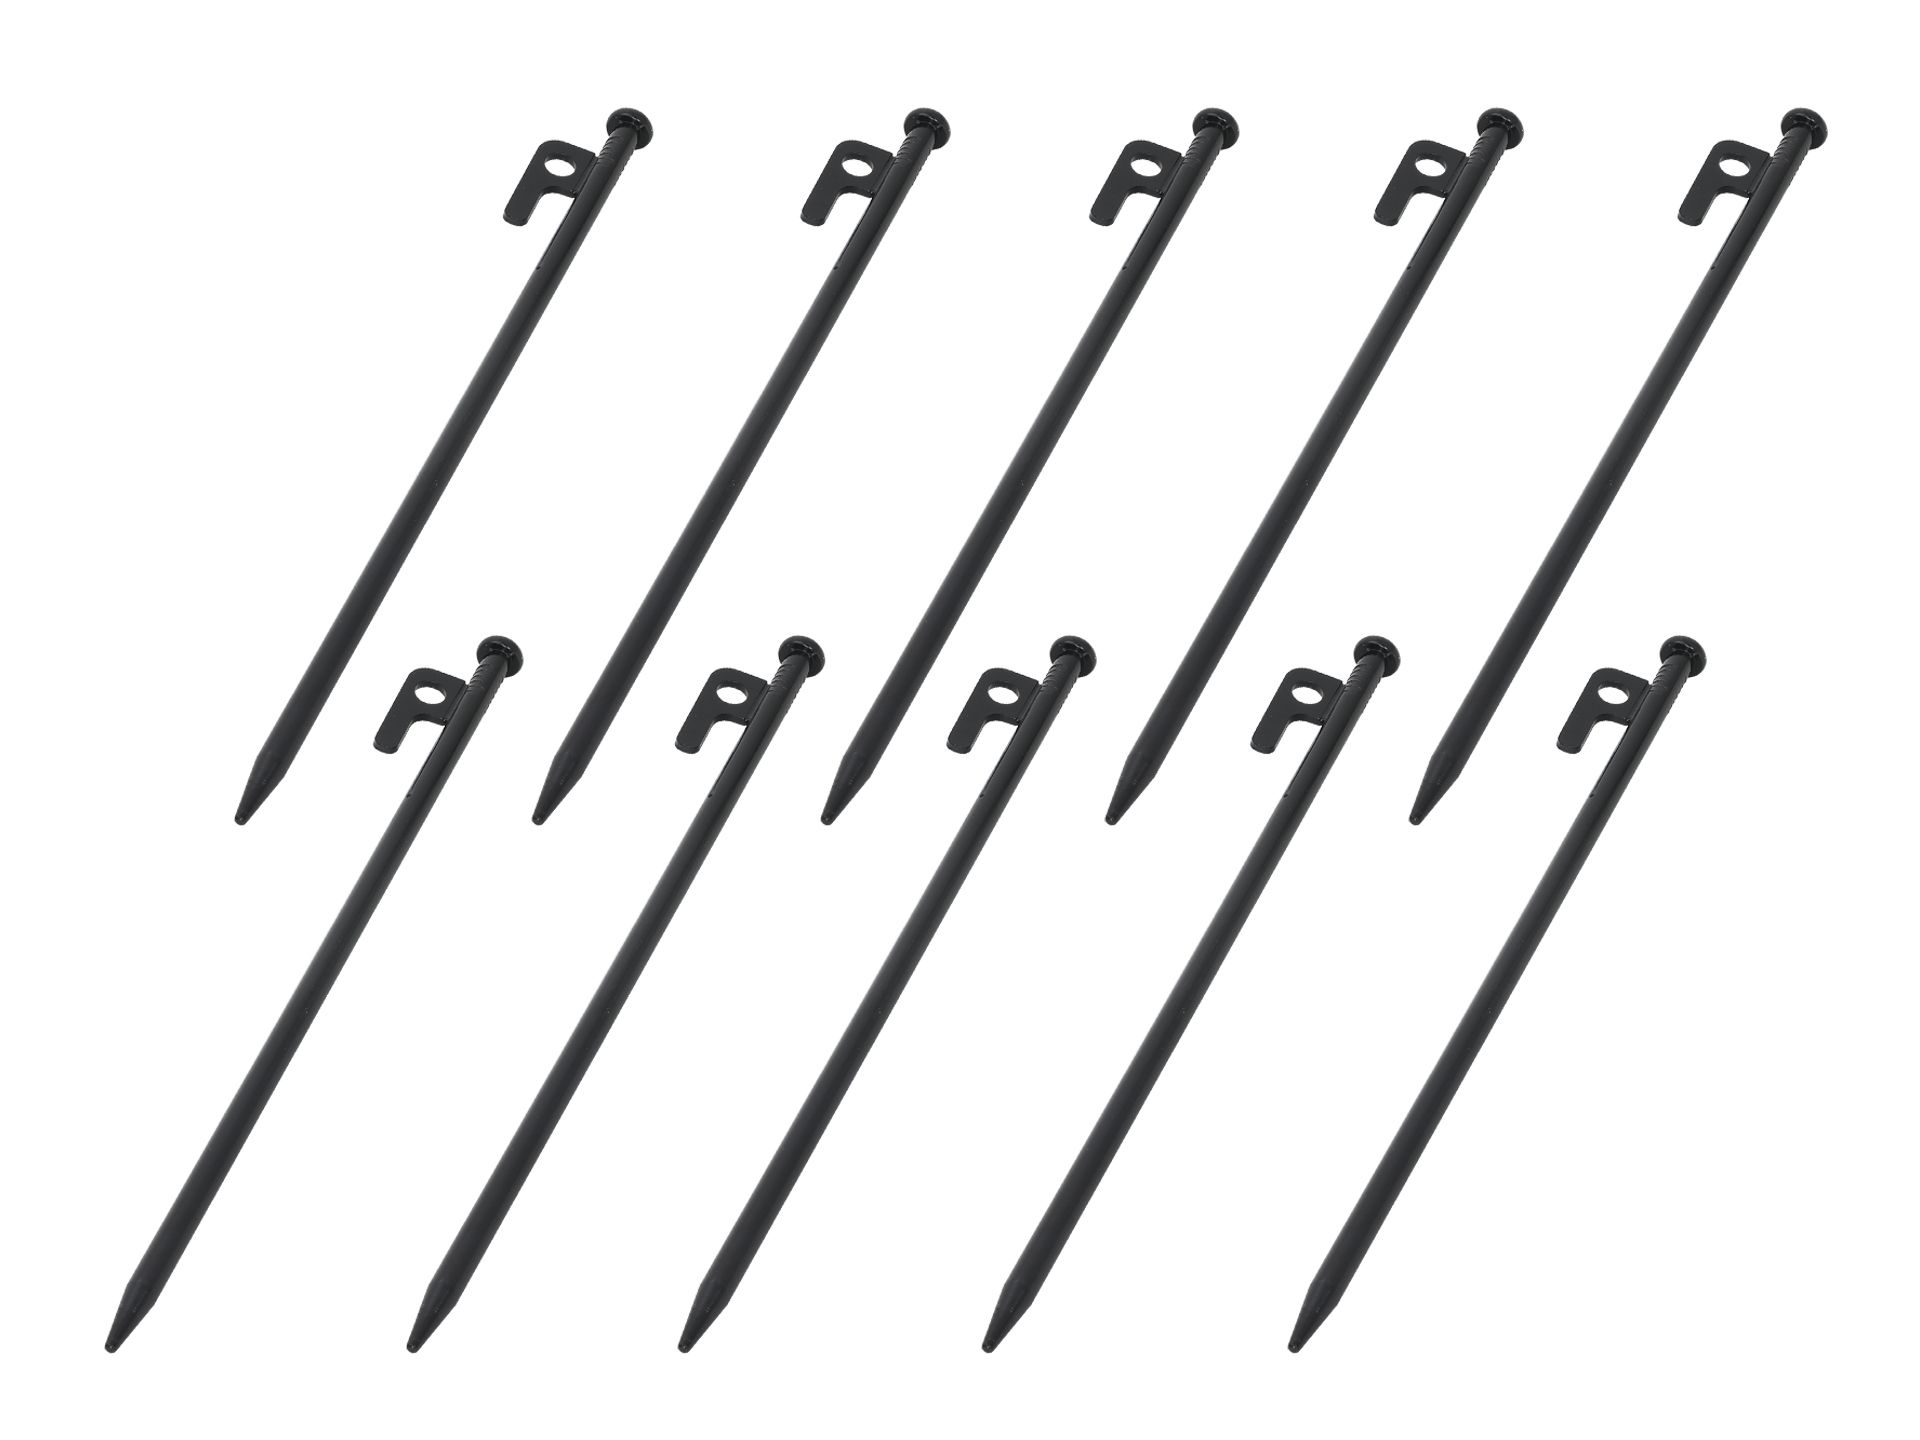 Heavy Duty Tent Stakes with Tent Ropes 30cm - Set of 10